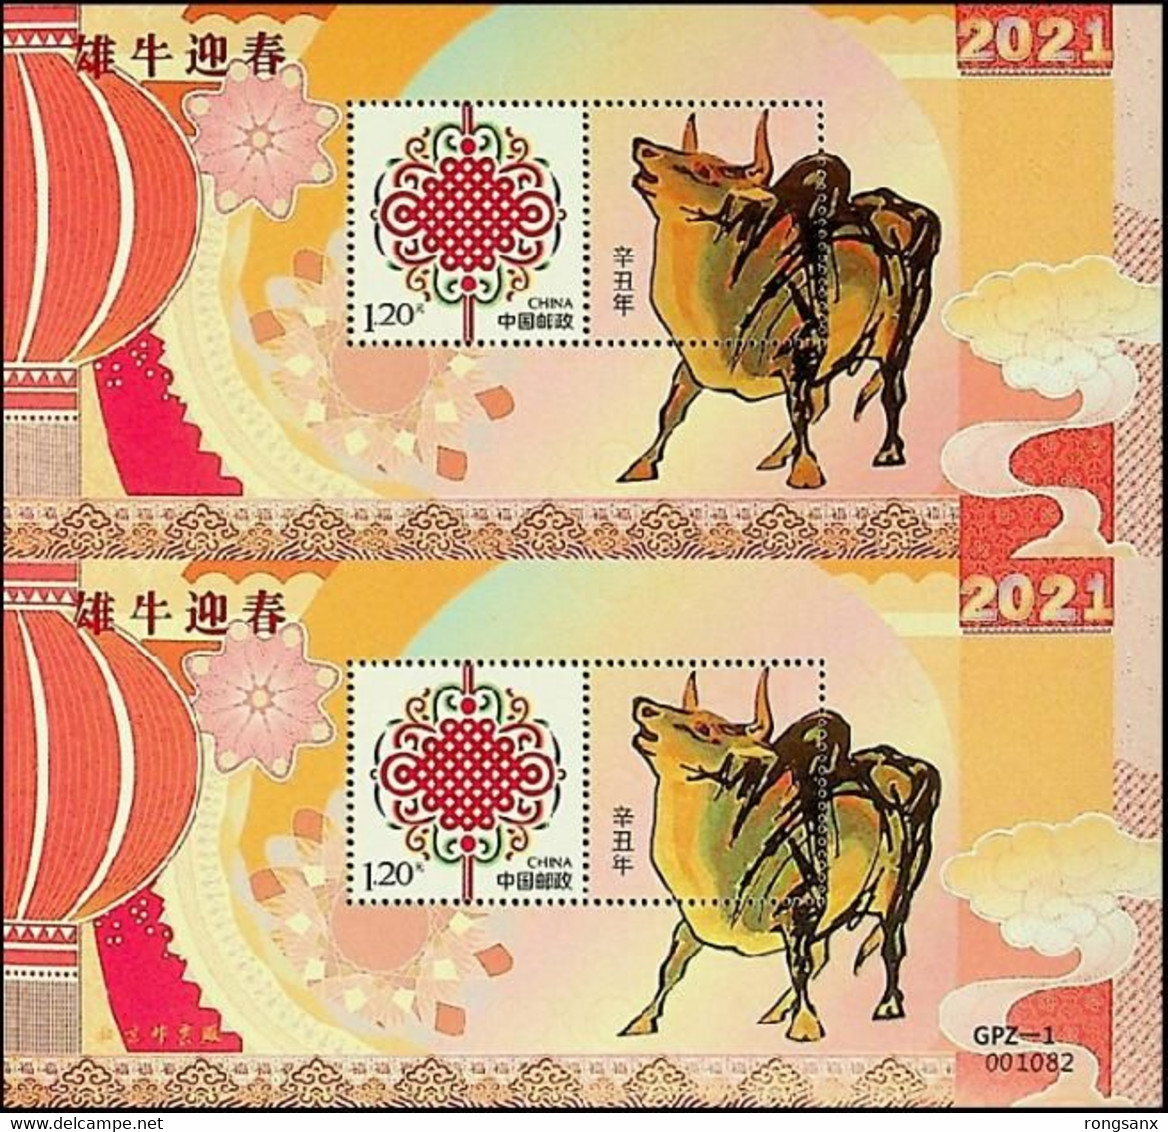 2021 CHINA YEAR OF THE BULL OX GREETING DOUBLE SHEETLET MS GPZ-1 - Chinese New Year